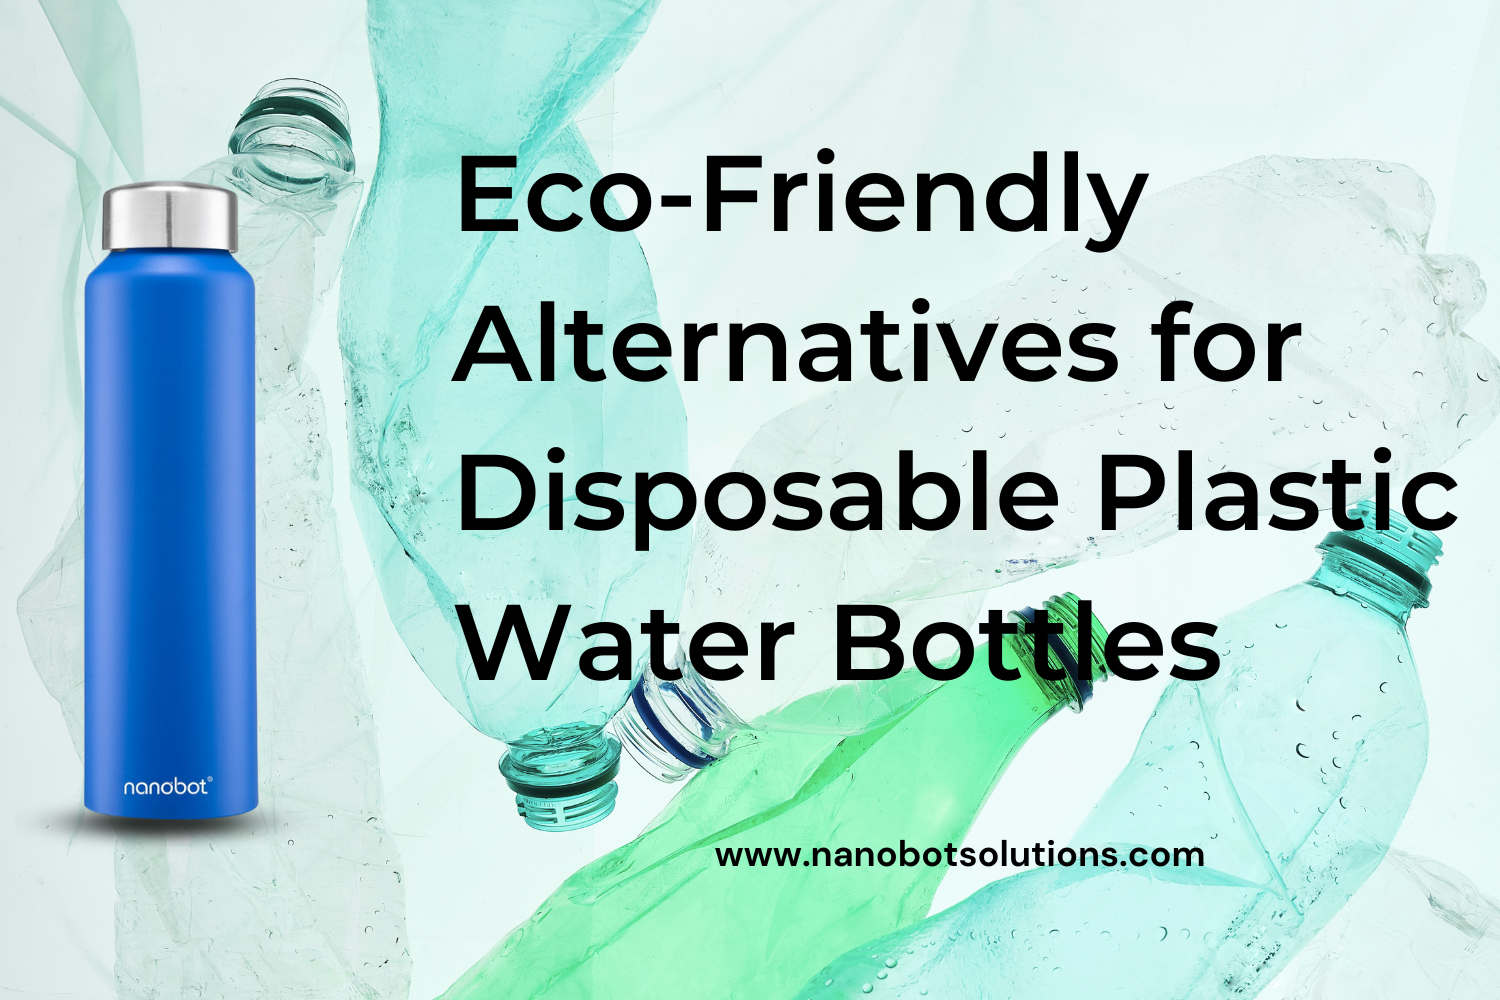 Eco-Friendly Alternatives for Disposable Plastic Water Bottles